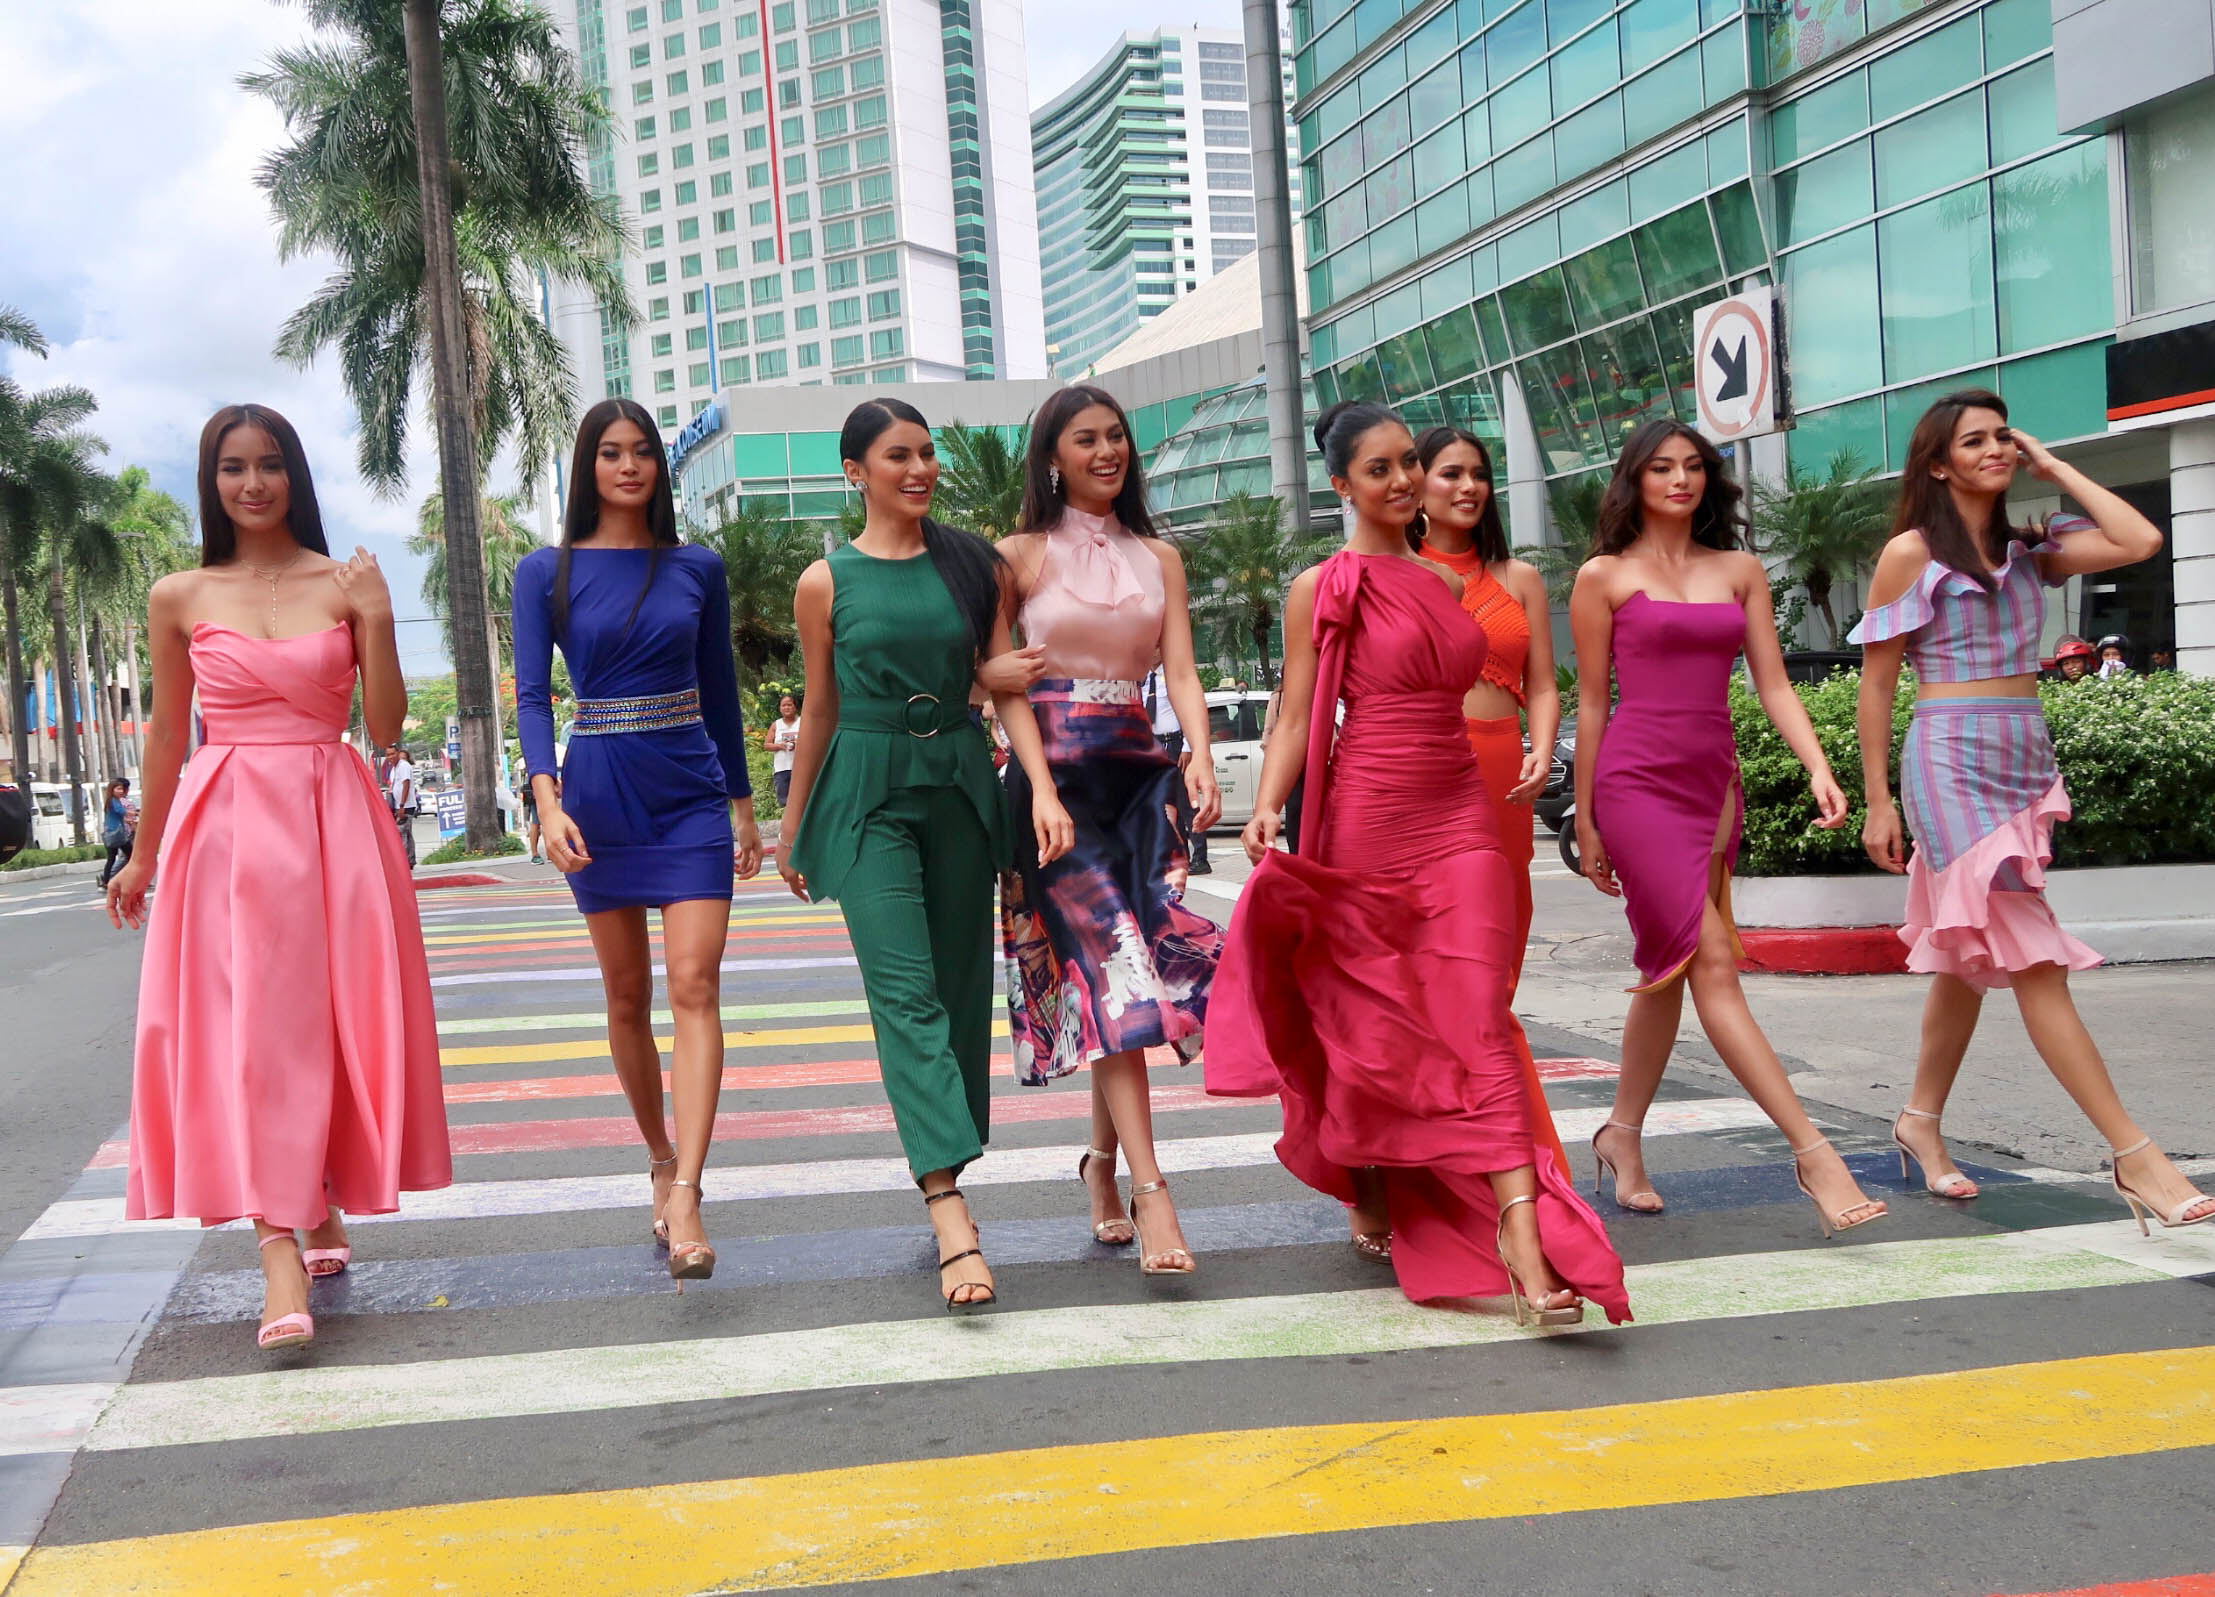 PRIDE IN ARANETA. The Binibining Pilipinas 2019 queens walk together at the 'Pride' pedestrian in support of  Pride Walk at Araneta Center. Photos by Voltaire Tayag/Rappler 